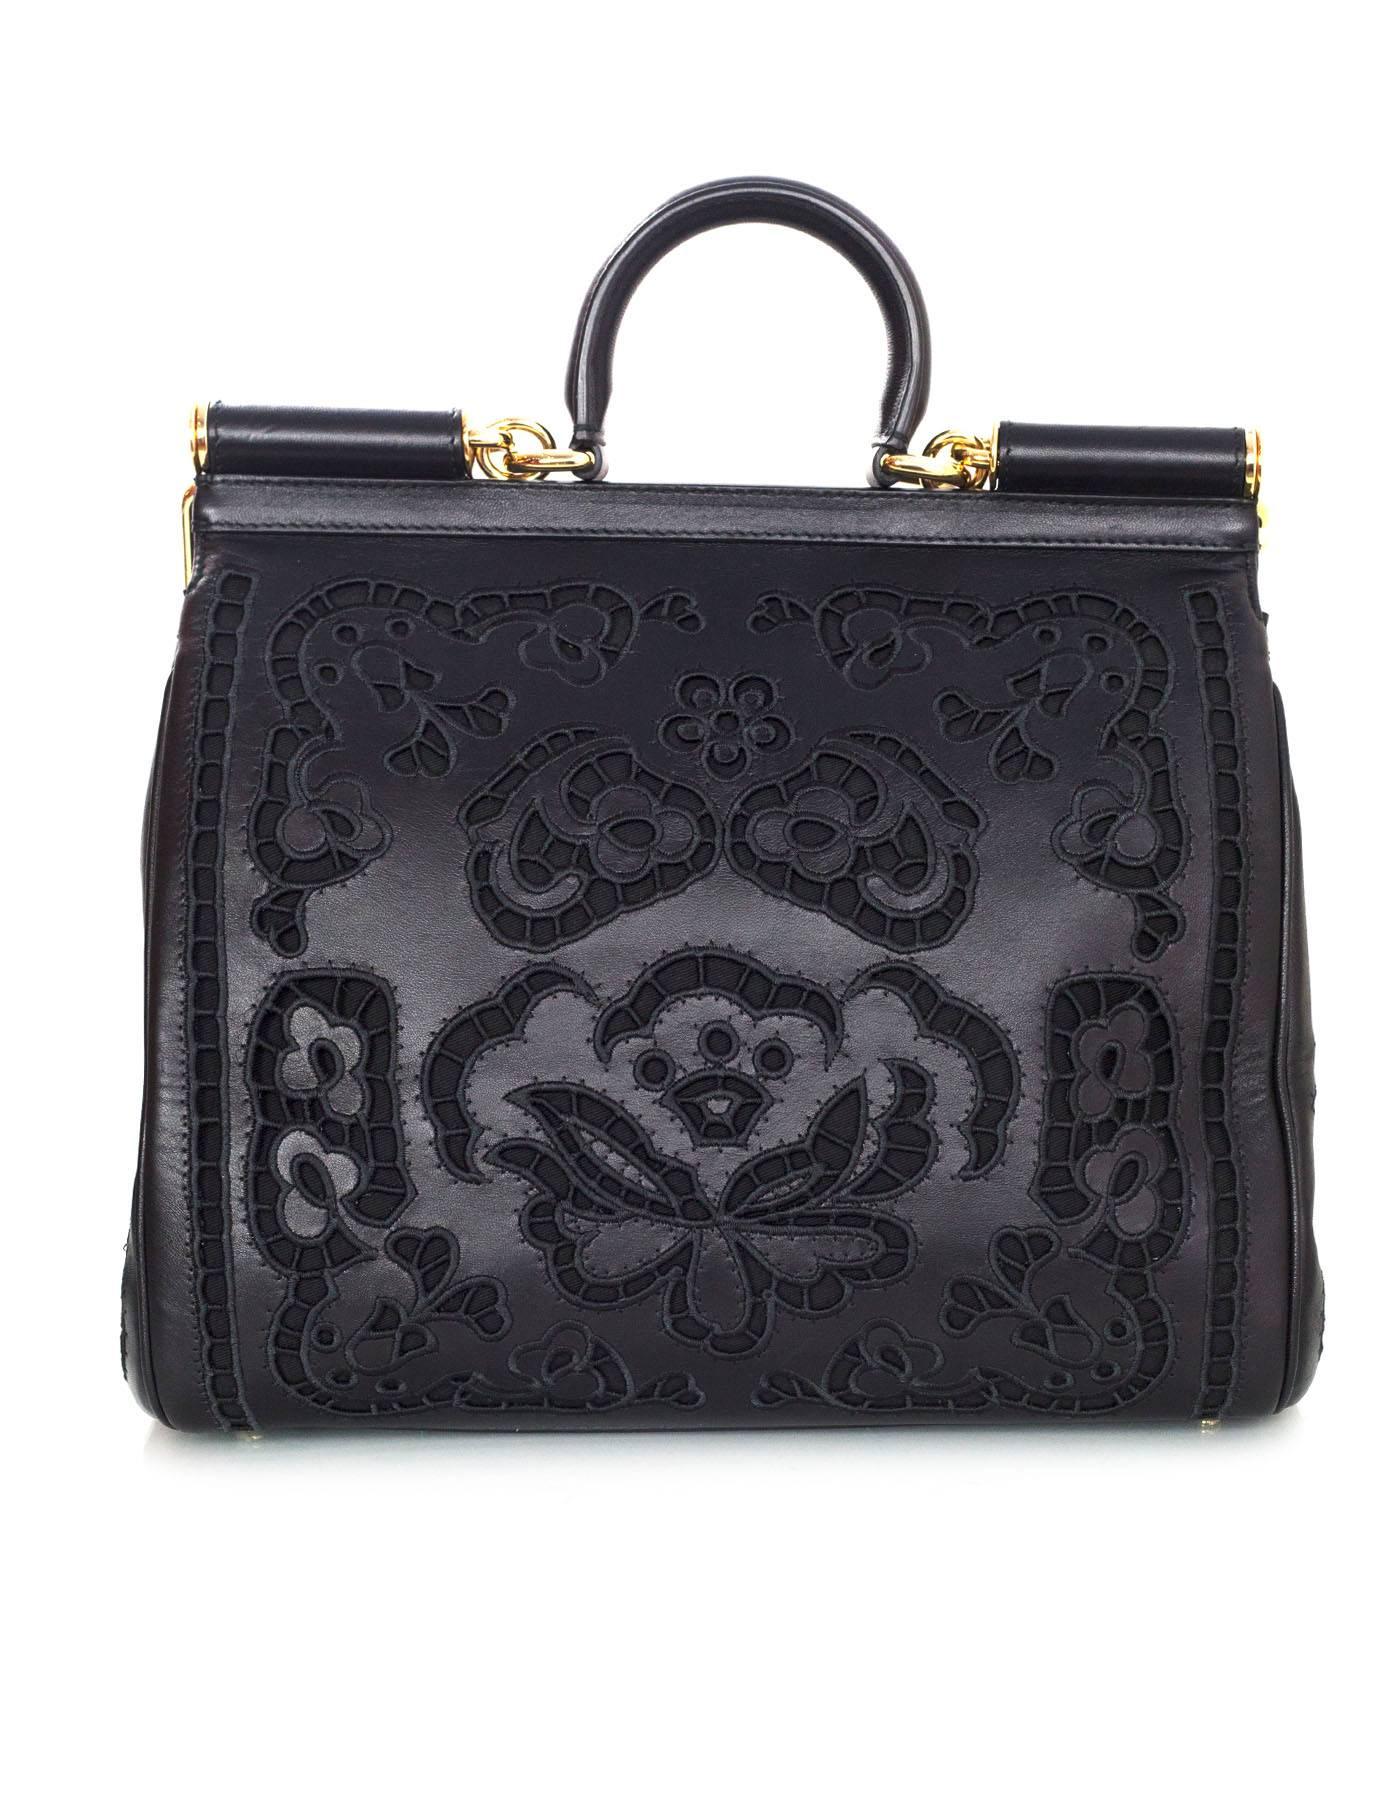 Dolce & Gabbana Black Laser Cut Lace Miss Sicily Handle Bag In Excellent Condition In New York, NY